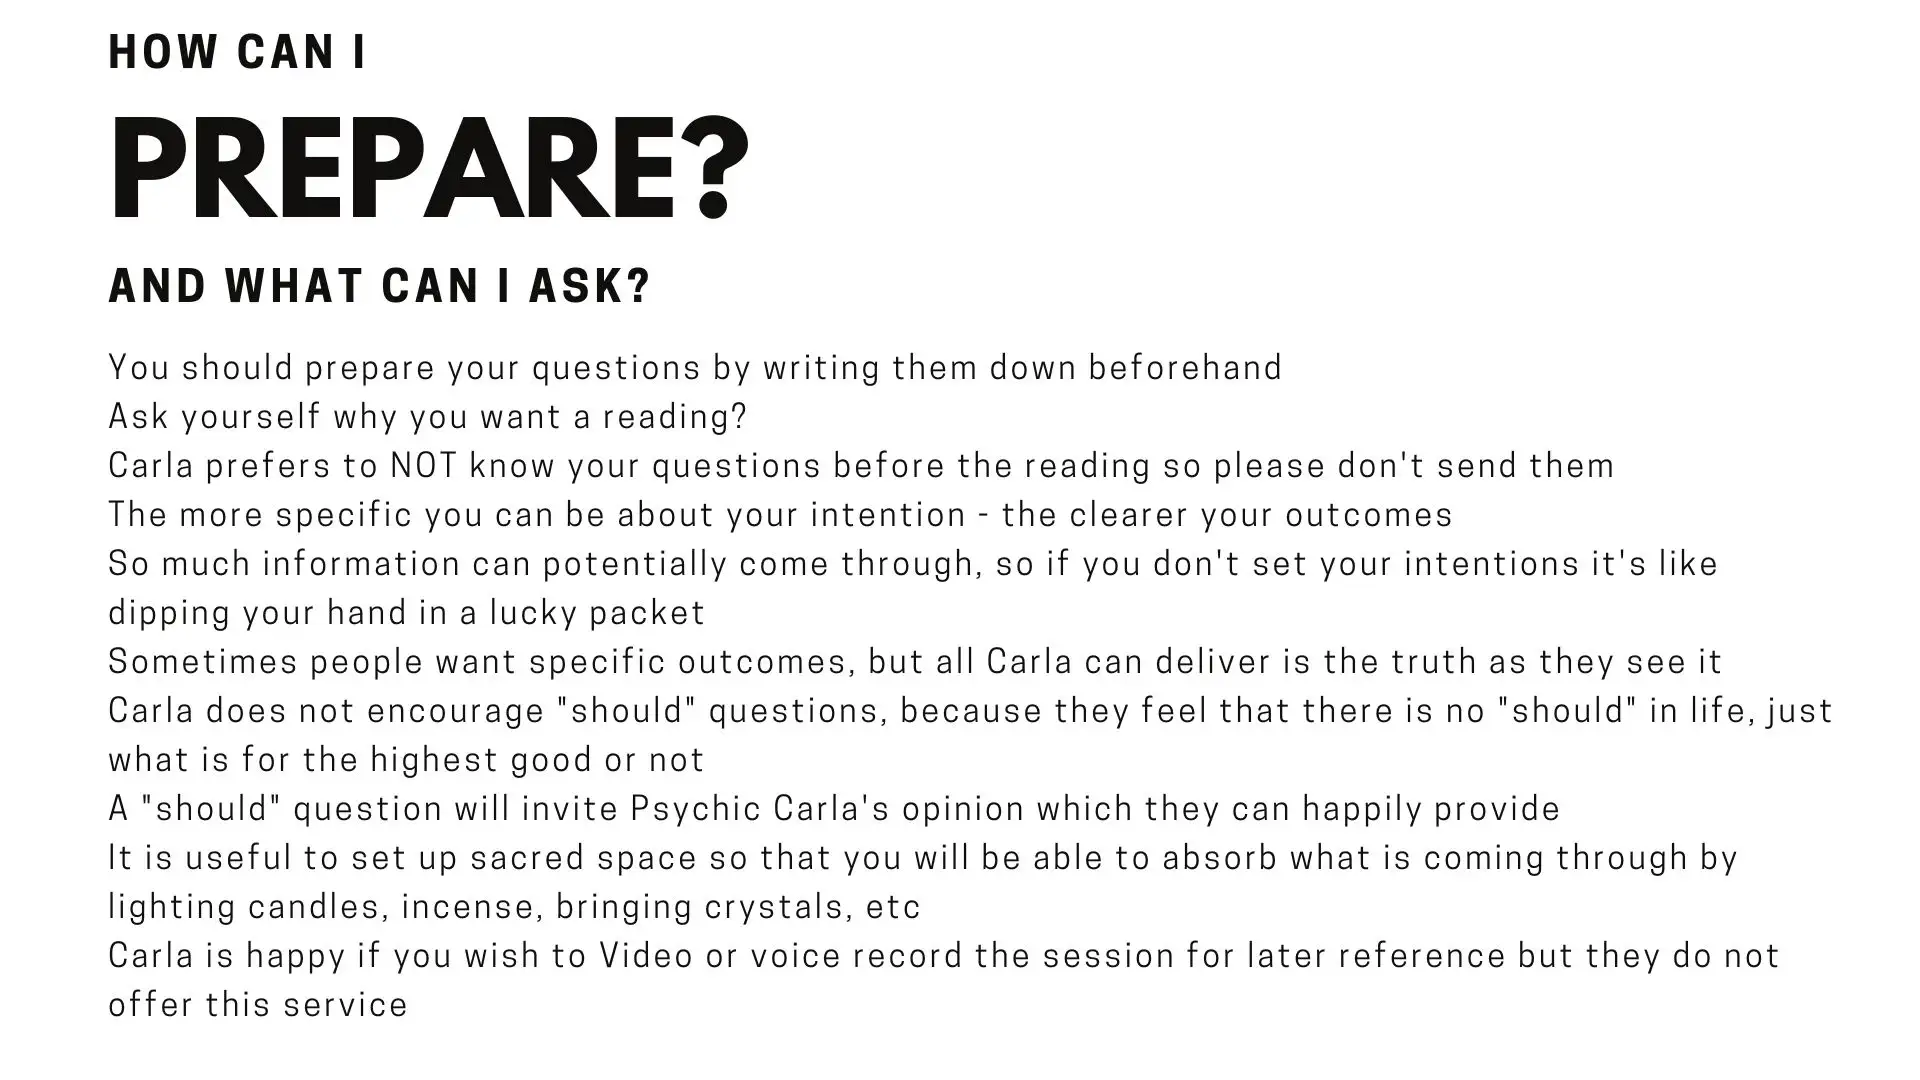 How can I prepare for a reading with Psychic Carla Lunascention and the Blue Team You should prepare your questions by writing them down beforehand Ask yourself why you want a reading?  Carla prefers to NOT know your questions before the reading so please don't send them The more specific you can be about your intention - the clearer your outcomes So much information can potentially come through, so if you don't set your intentions it's like dipping your hand in a lucky packet Sometimes people want specific outcomes, but all Carla can deliver is the truth as they see it Carla does not encourage "should" questions, because they feel that there is no "should" in life, just what is for the highest good or not A "should" question will invite Psychic Carla's opinion which they can happily provide It is useful to set up sacred space so that you will be able to absorb what is coming through by lighting candles, incense, bringing crystals, etc Carla is happy if you wish to Video or voice record the session for later reference but they do not offer this service  